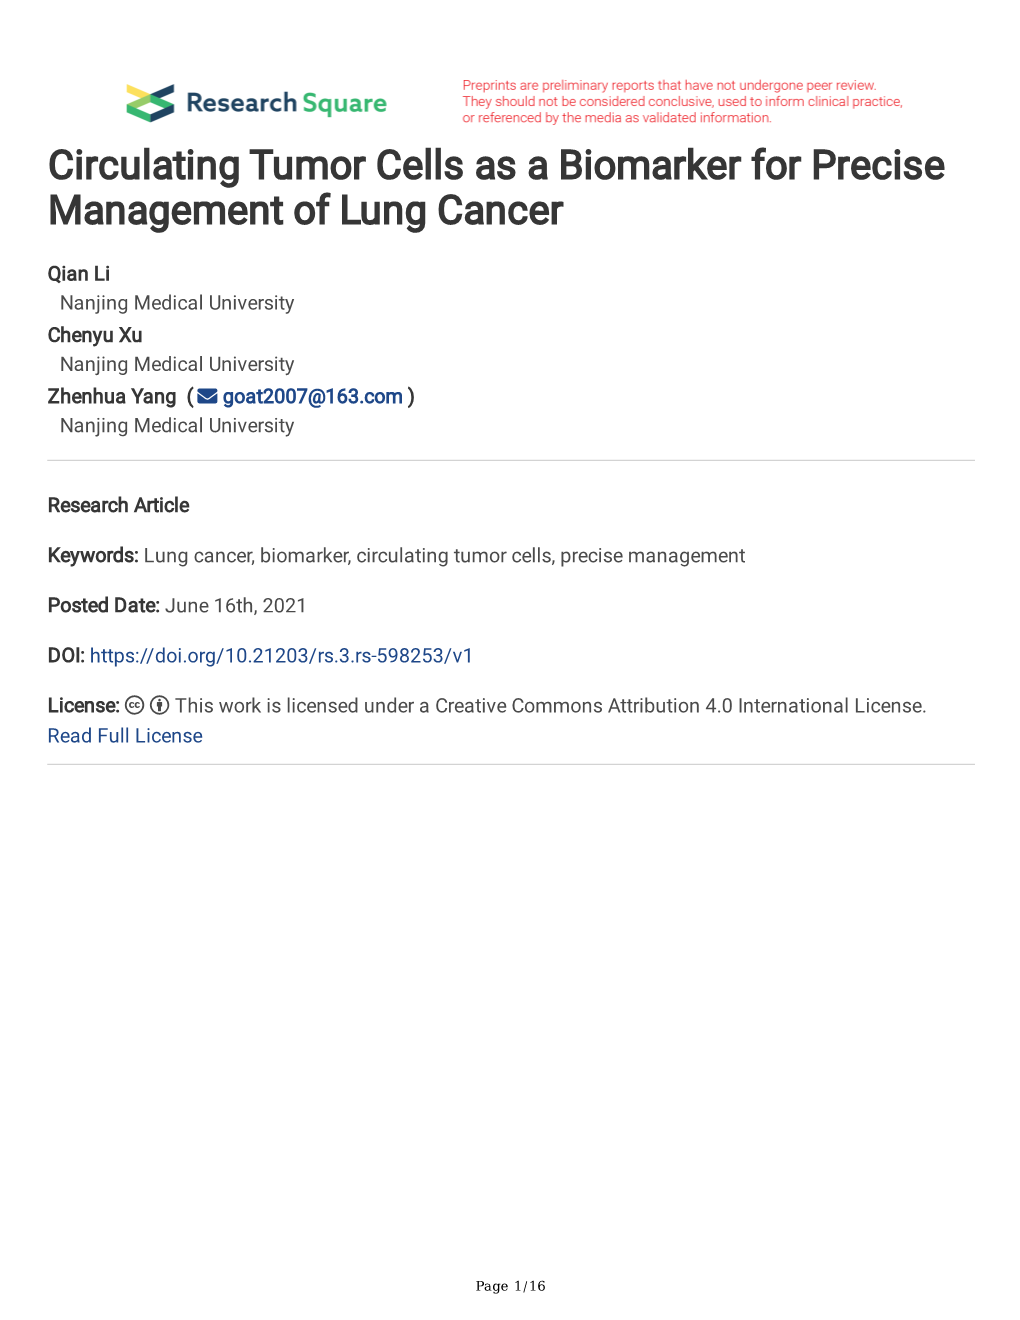 Circulating Tumor Cells As a Biomarker for Precise Management of Lung Cancer